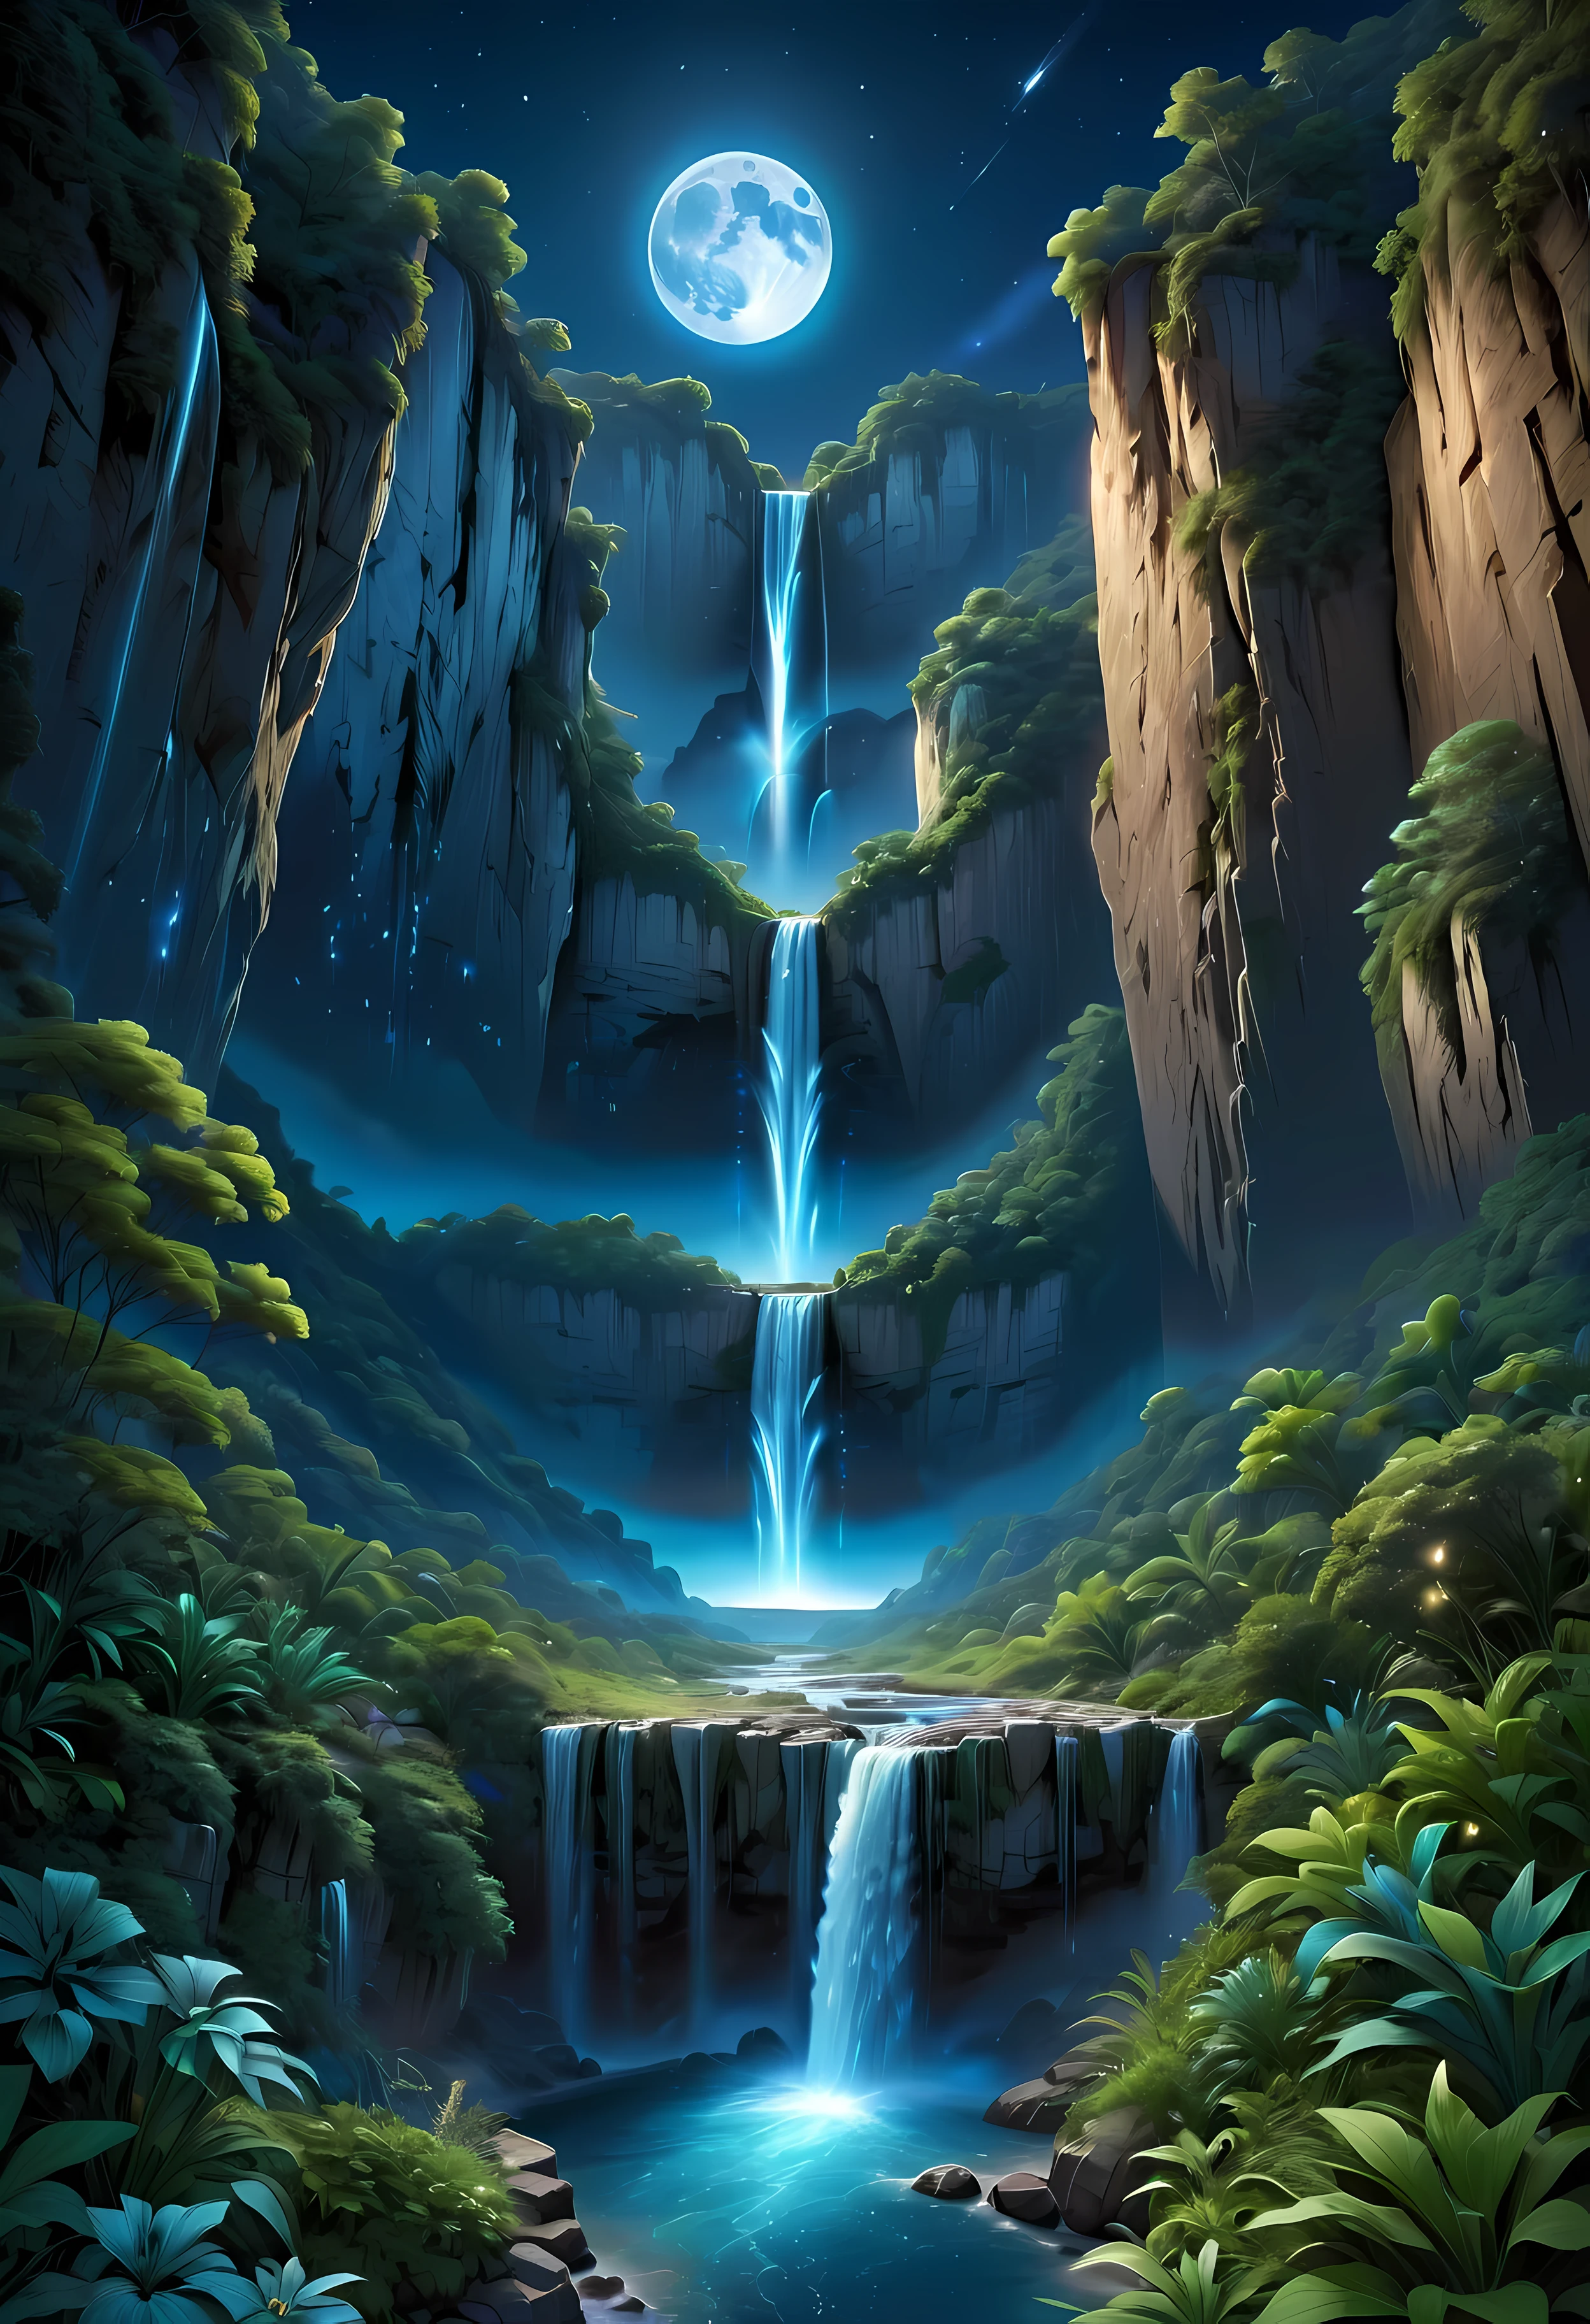 Towering steep and towering high waterfall cliff garden wild, asymmetric waterfall canyon,
Coexistence with the natural environment, waterfall canyon night, clear night sky, meteors across, moonlight, extremely detailed, best quality, masterpiece, high resolution, Hyperrealistic, 8K, top-view,  high angle view, Blue Color Palette, Minimalism.